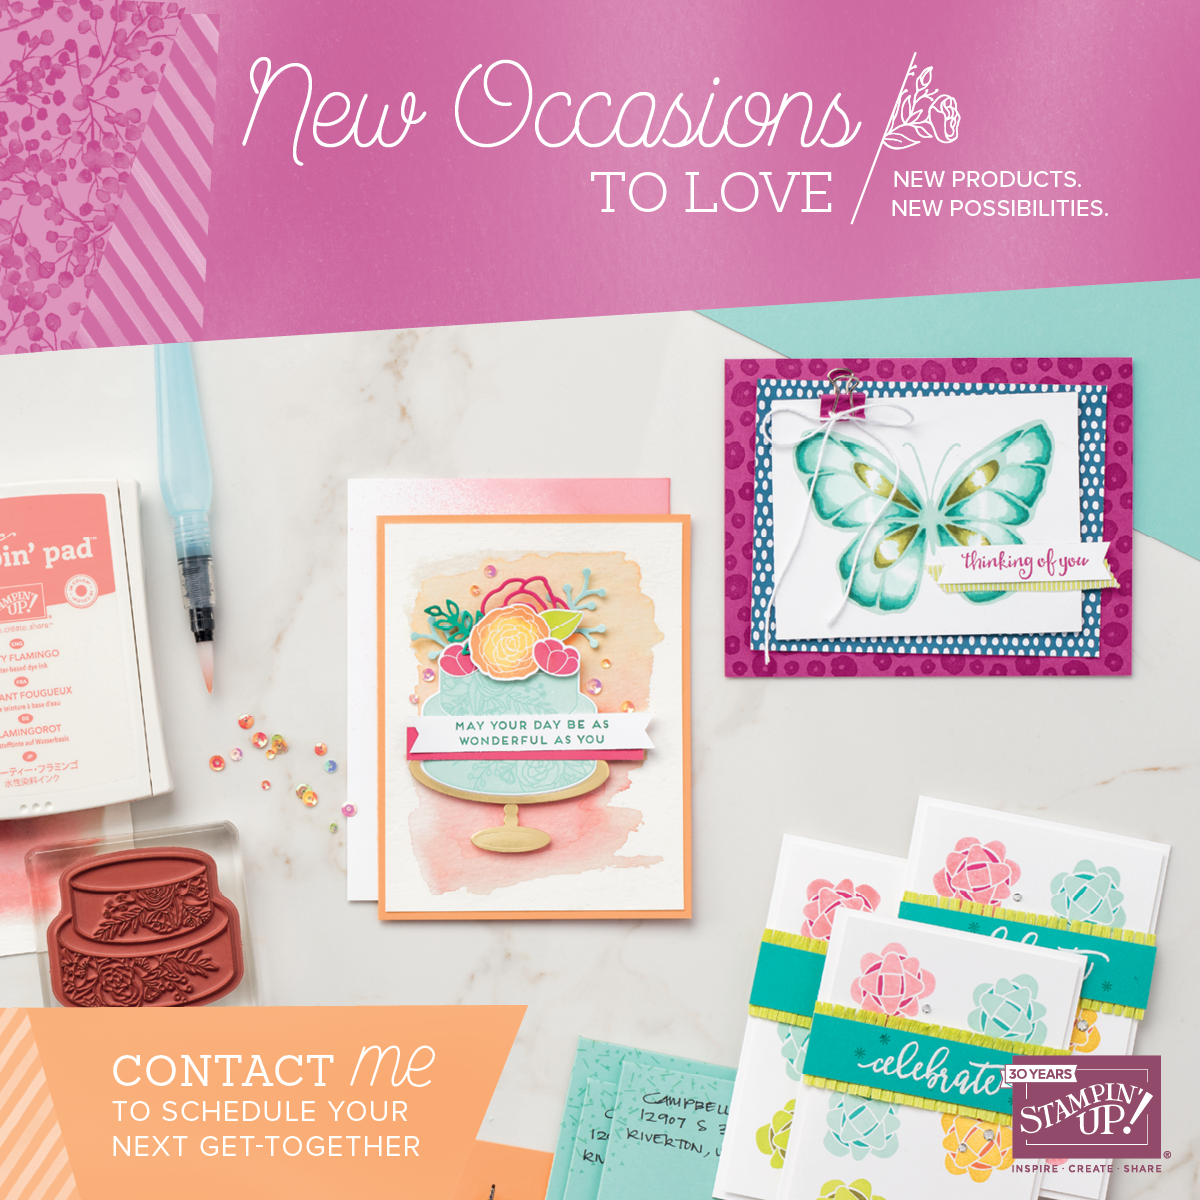 2018 Occassions Catalogue